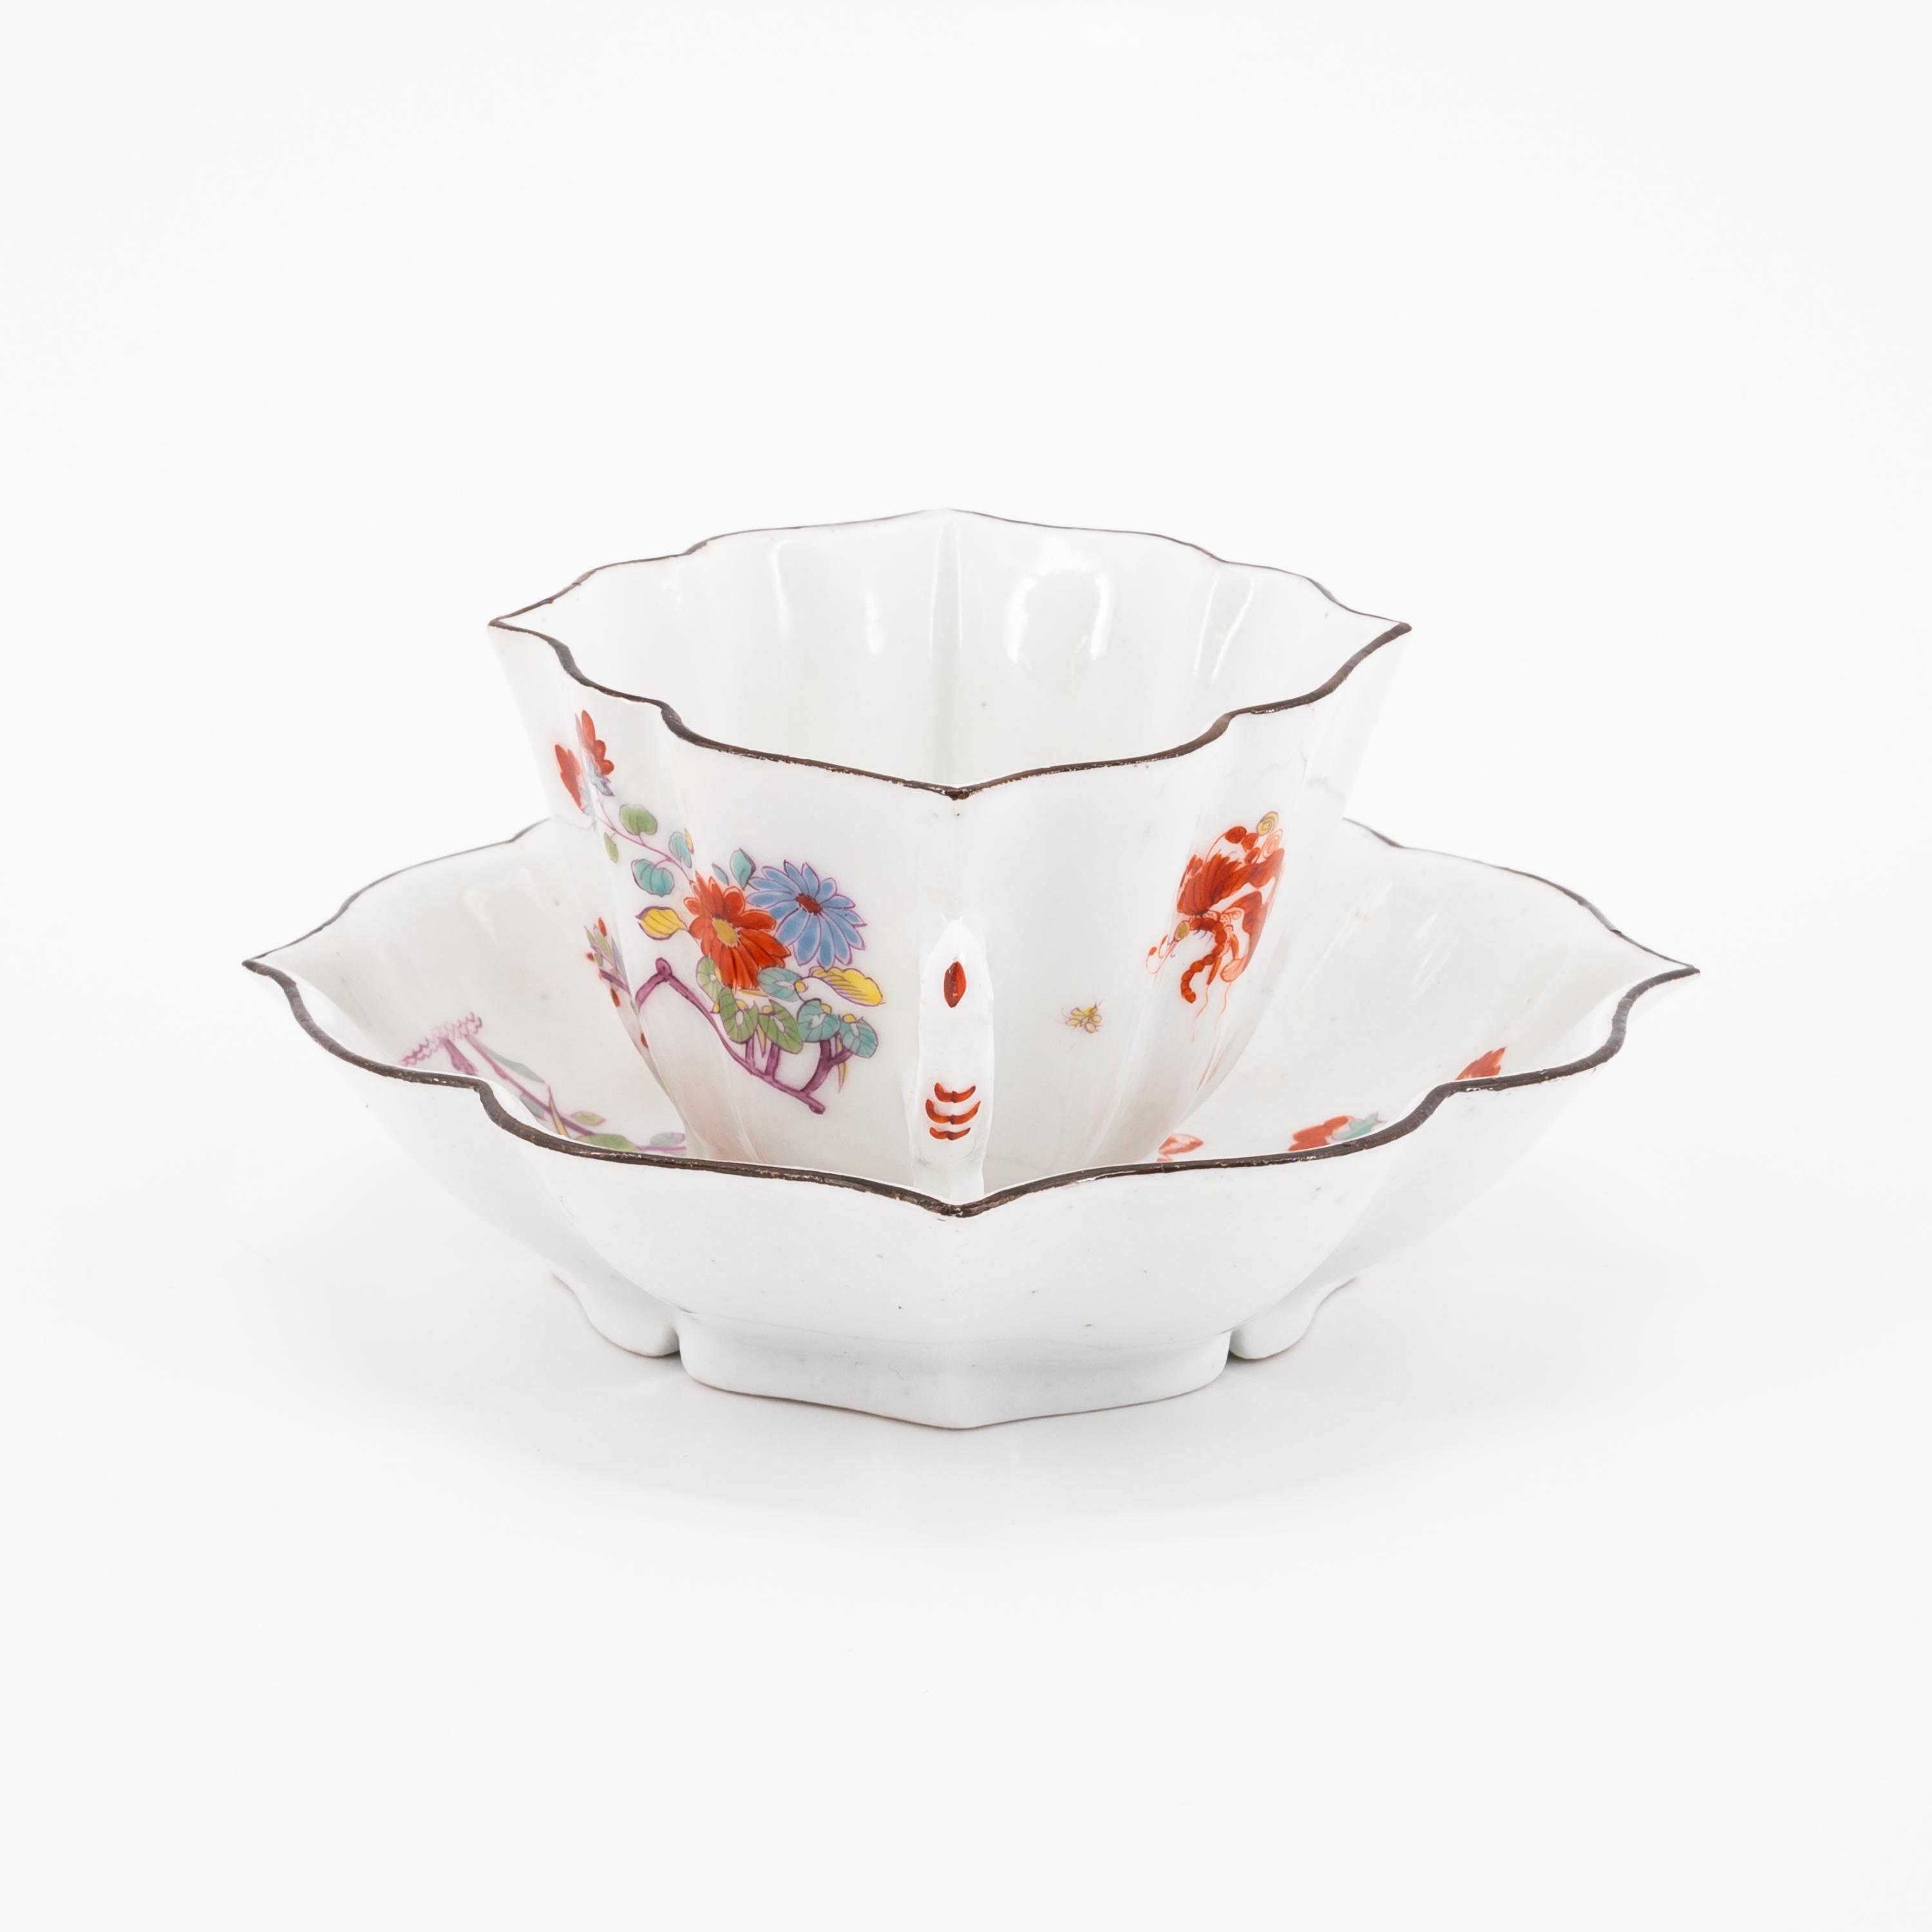 SCALLOPED PORCELAIN CUPS AND SAUCERS WITH KAKIEMON DECOR - Image 2 of 6